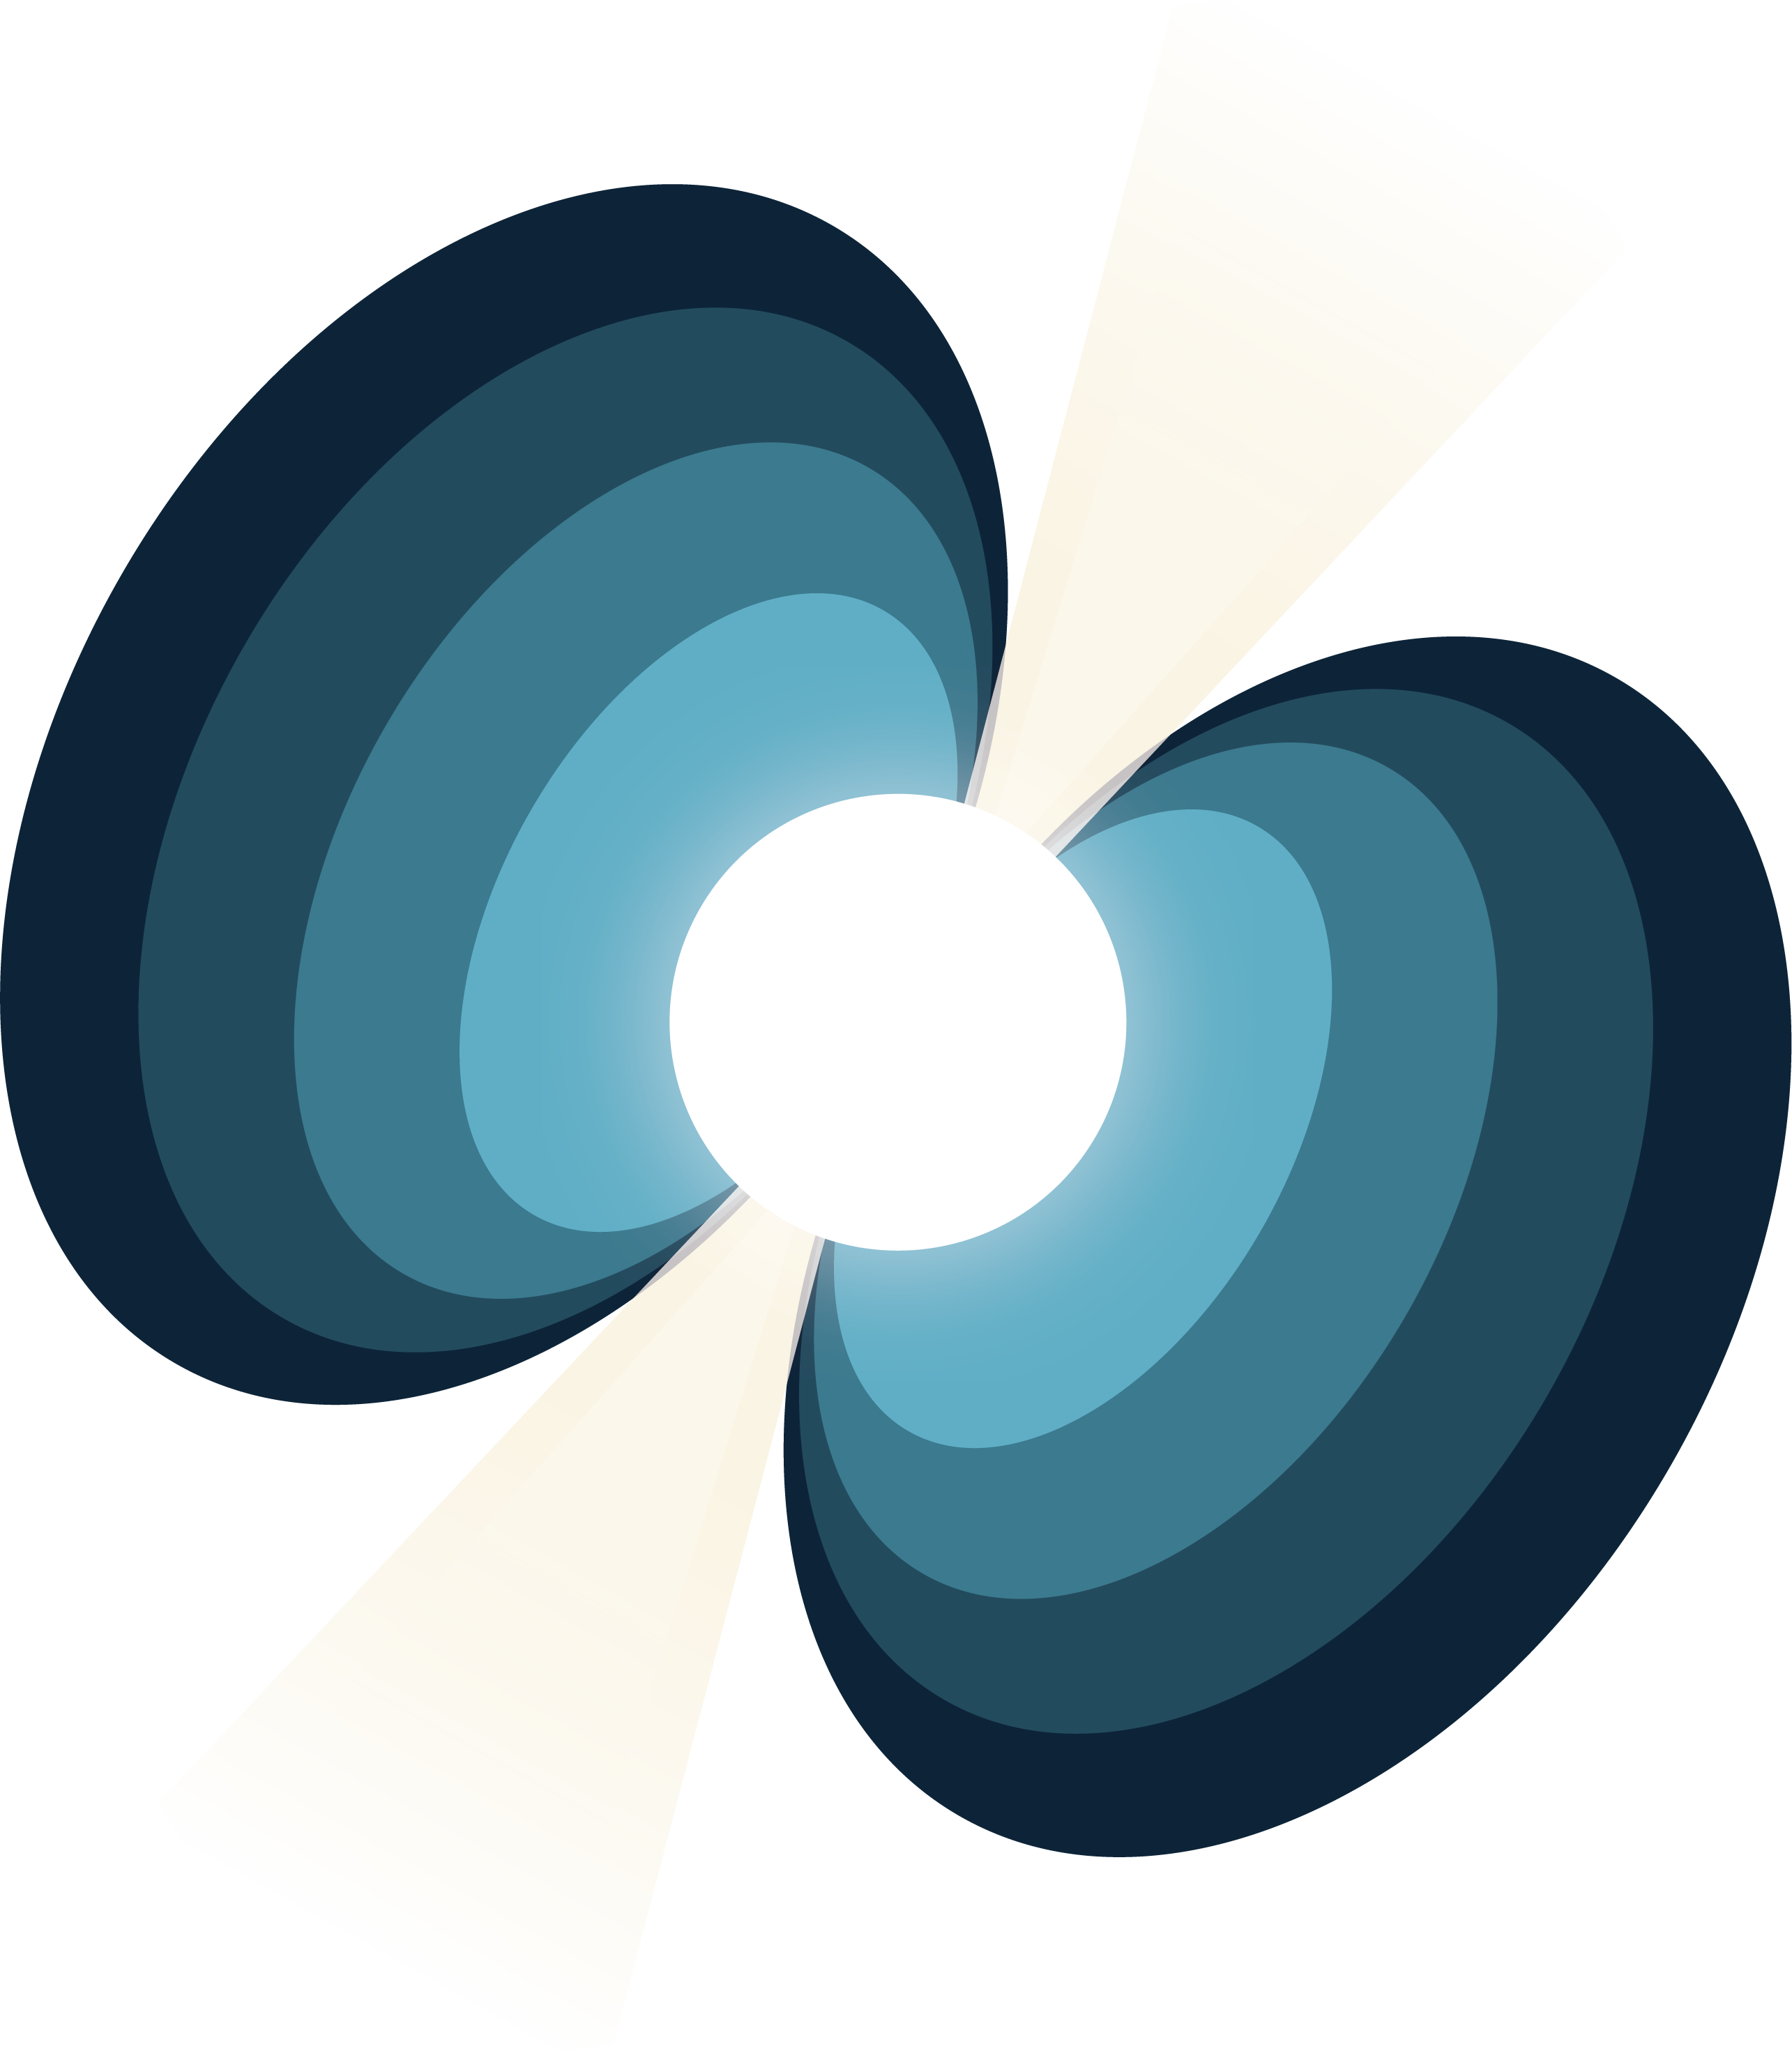 This object resembles a tilted open clamshell with a pearl in the center. The two halves of the shape have curved stripes that start as a bold, dark blue on the outside and move inward towards the center, getting brighter and lighter. In the center is a bright white circle with transparent yellow beams emerging from its sides.